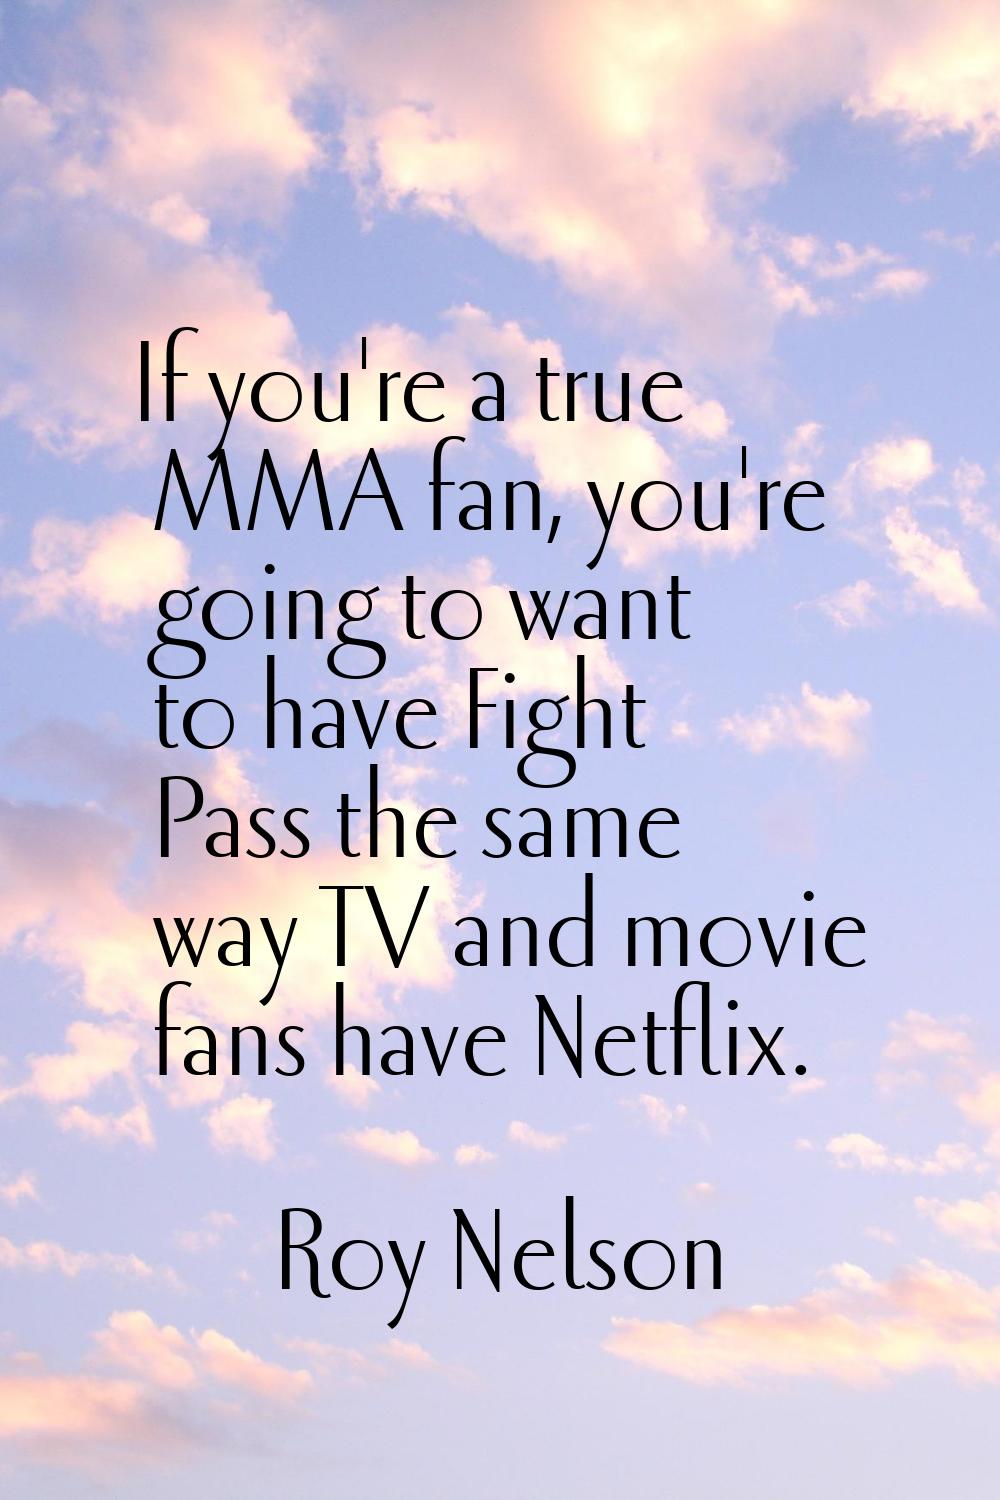 If you're a true MMA fan, you're going to want to have Fight Pass the same way TV and movie fans ha